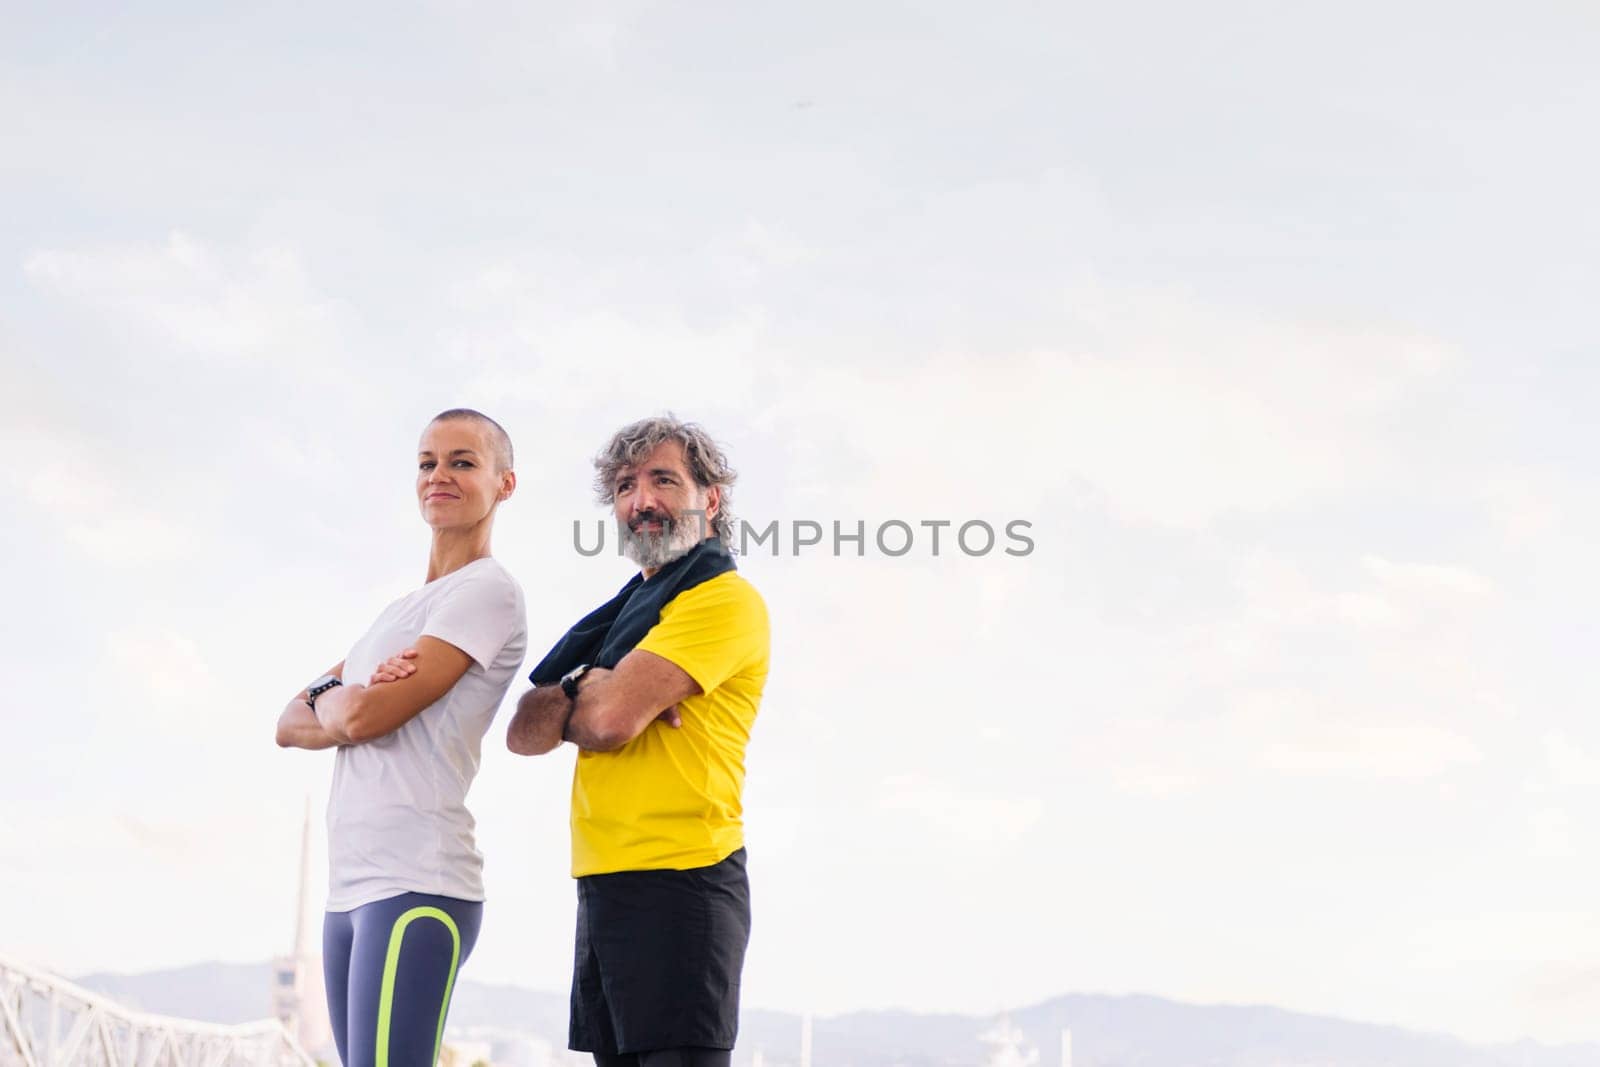 senior sportsman and young woman posing with arms crossed looking at camera, concept of active and healthy lifestyle in the middle age, copy space for text